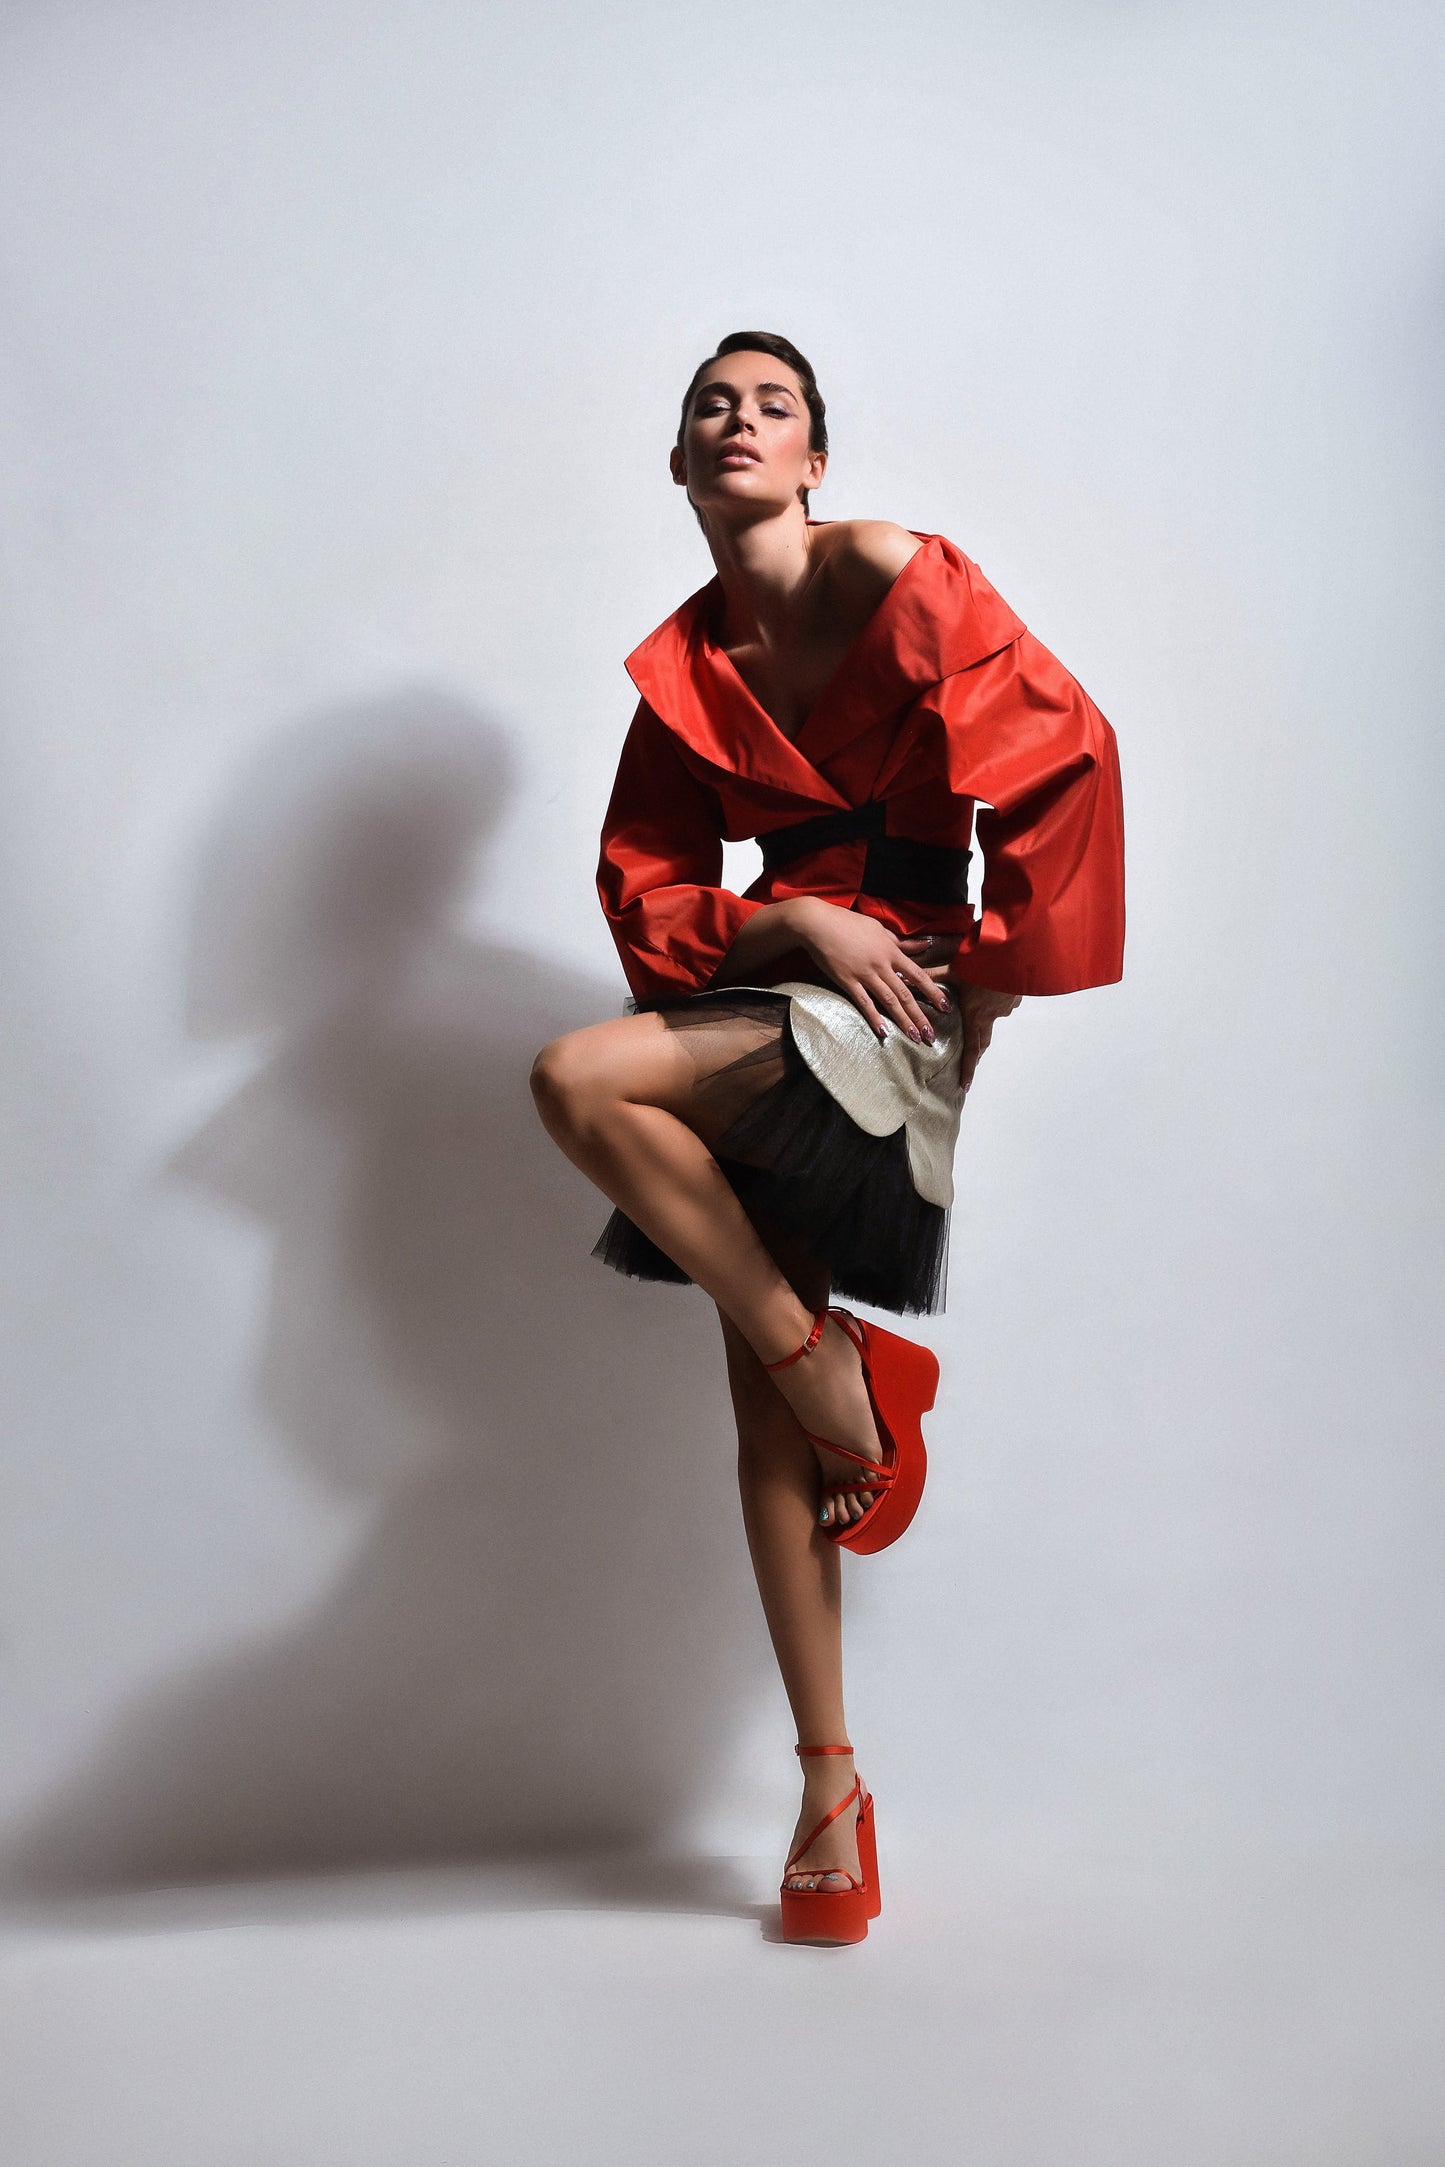 Dress made of red kimono and short skirt combined with tulle and bright material